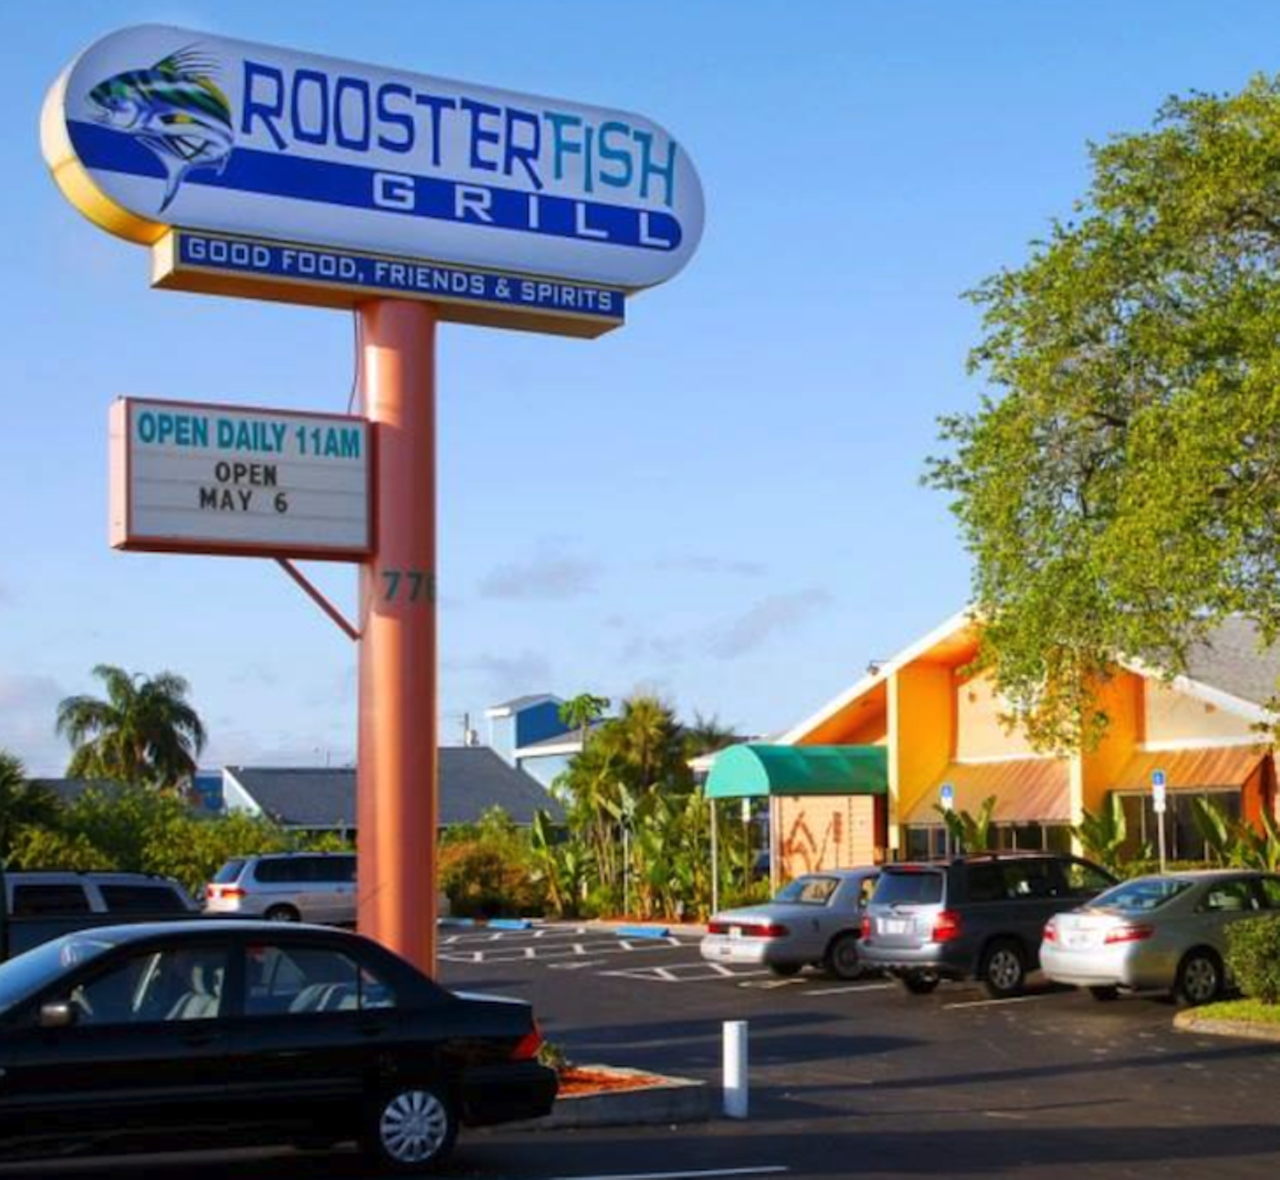 Roosterfish Grill   
776 Missouri Ave N, Largo
Hankering for some seafood? Look no further. Get your fix at Roosterfish, and if the temp isn&#146;t too hot, opt for outdoor seating. Ever been lucky enough to catch a Roosterfish? Bring in photo evidence and get your picture up on the wall in the restaurant. 
Photo via  Roosterfish Grill/ Facebook